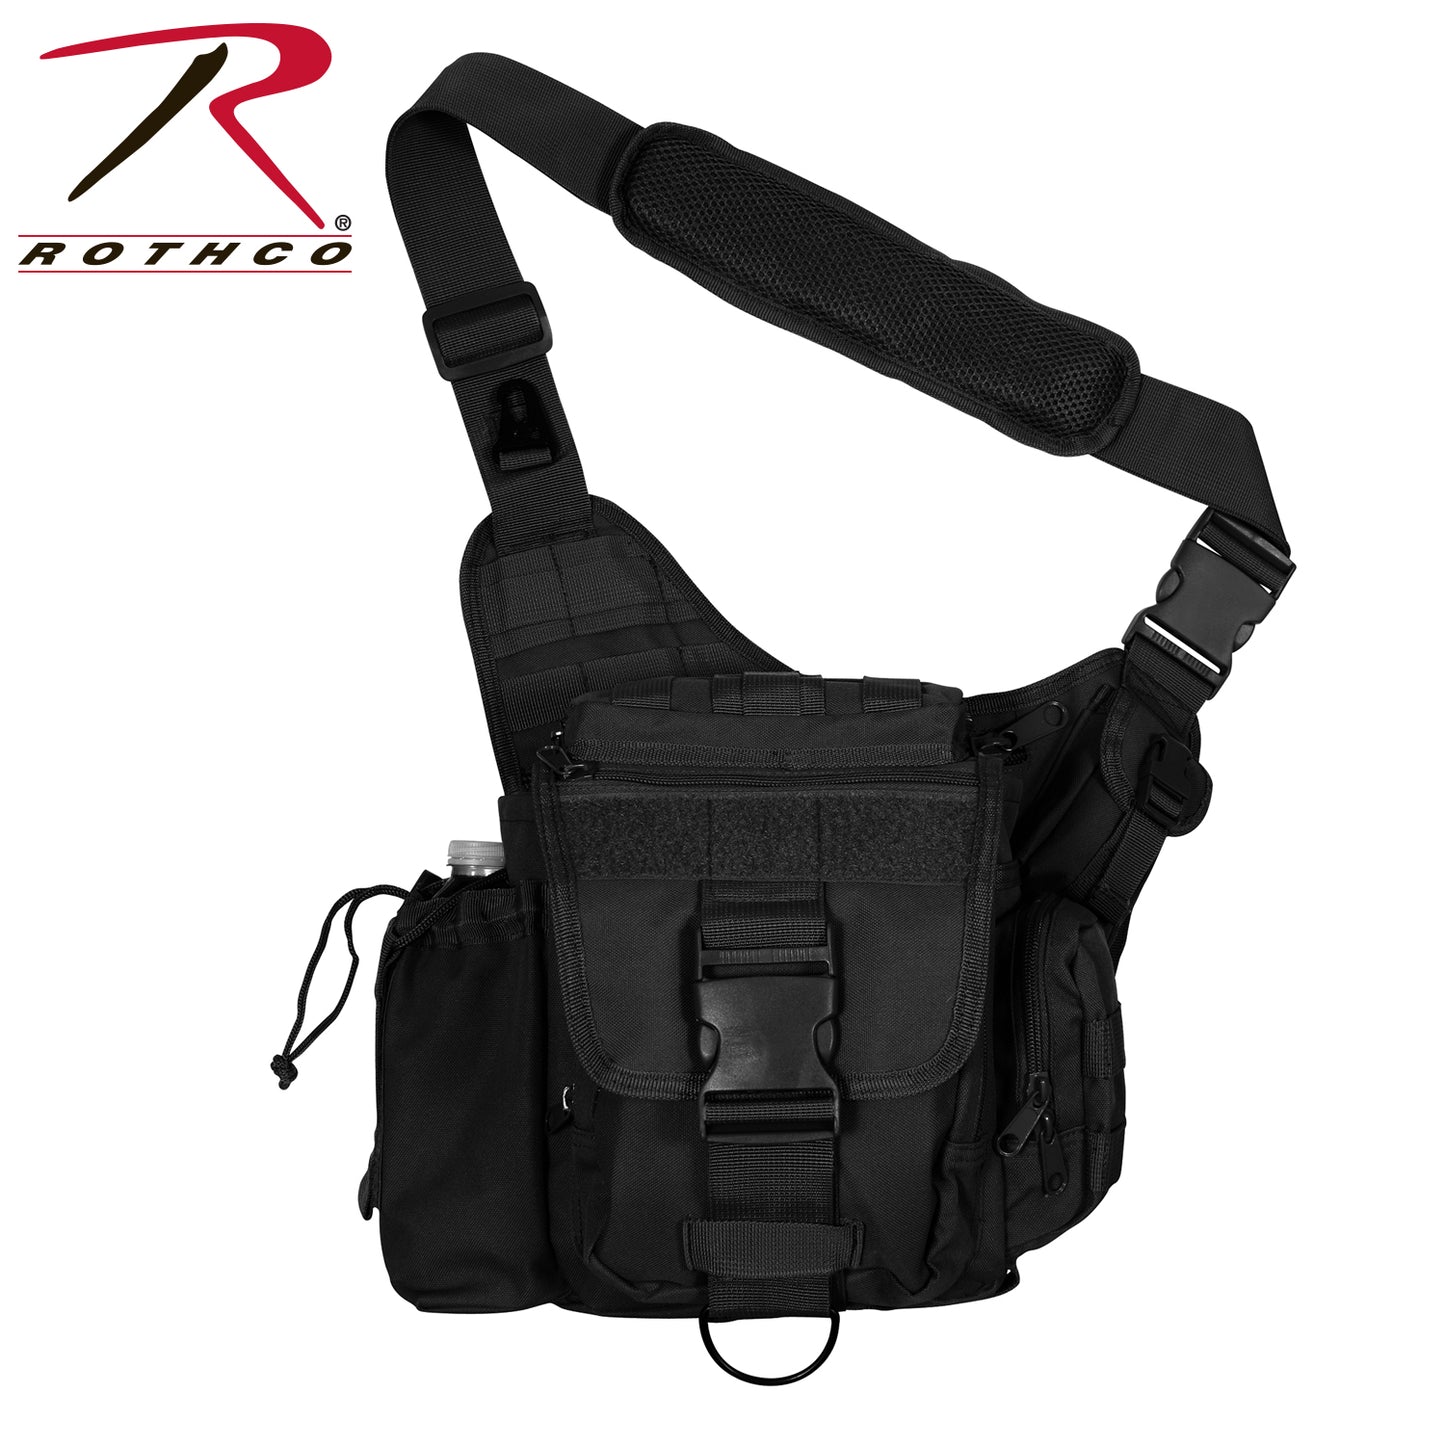 Milspec Advanced Tactical Bag Concealed Carry Bags MilTac Tactical Military Outdoor Gear Australia